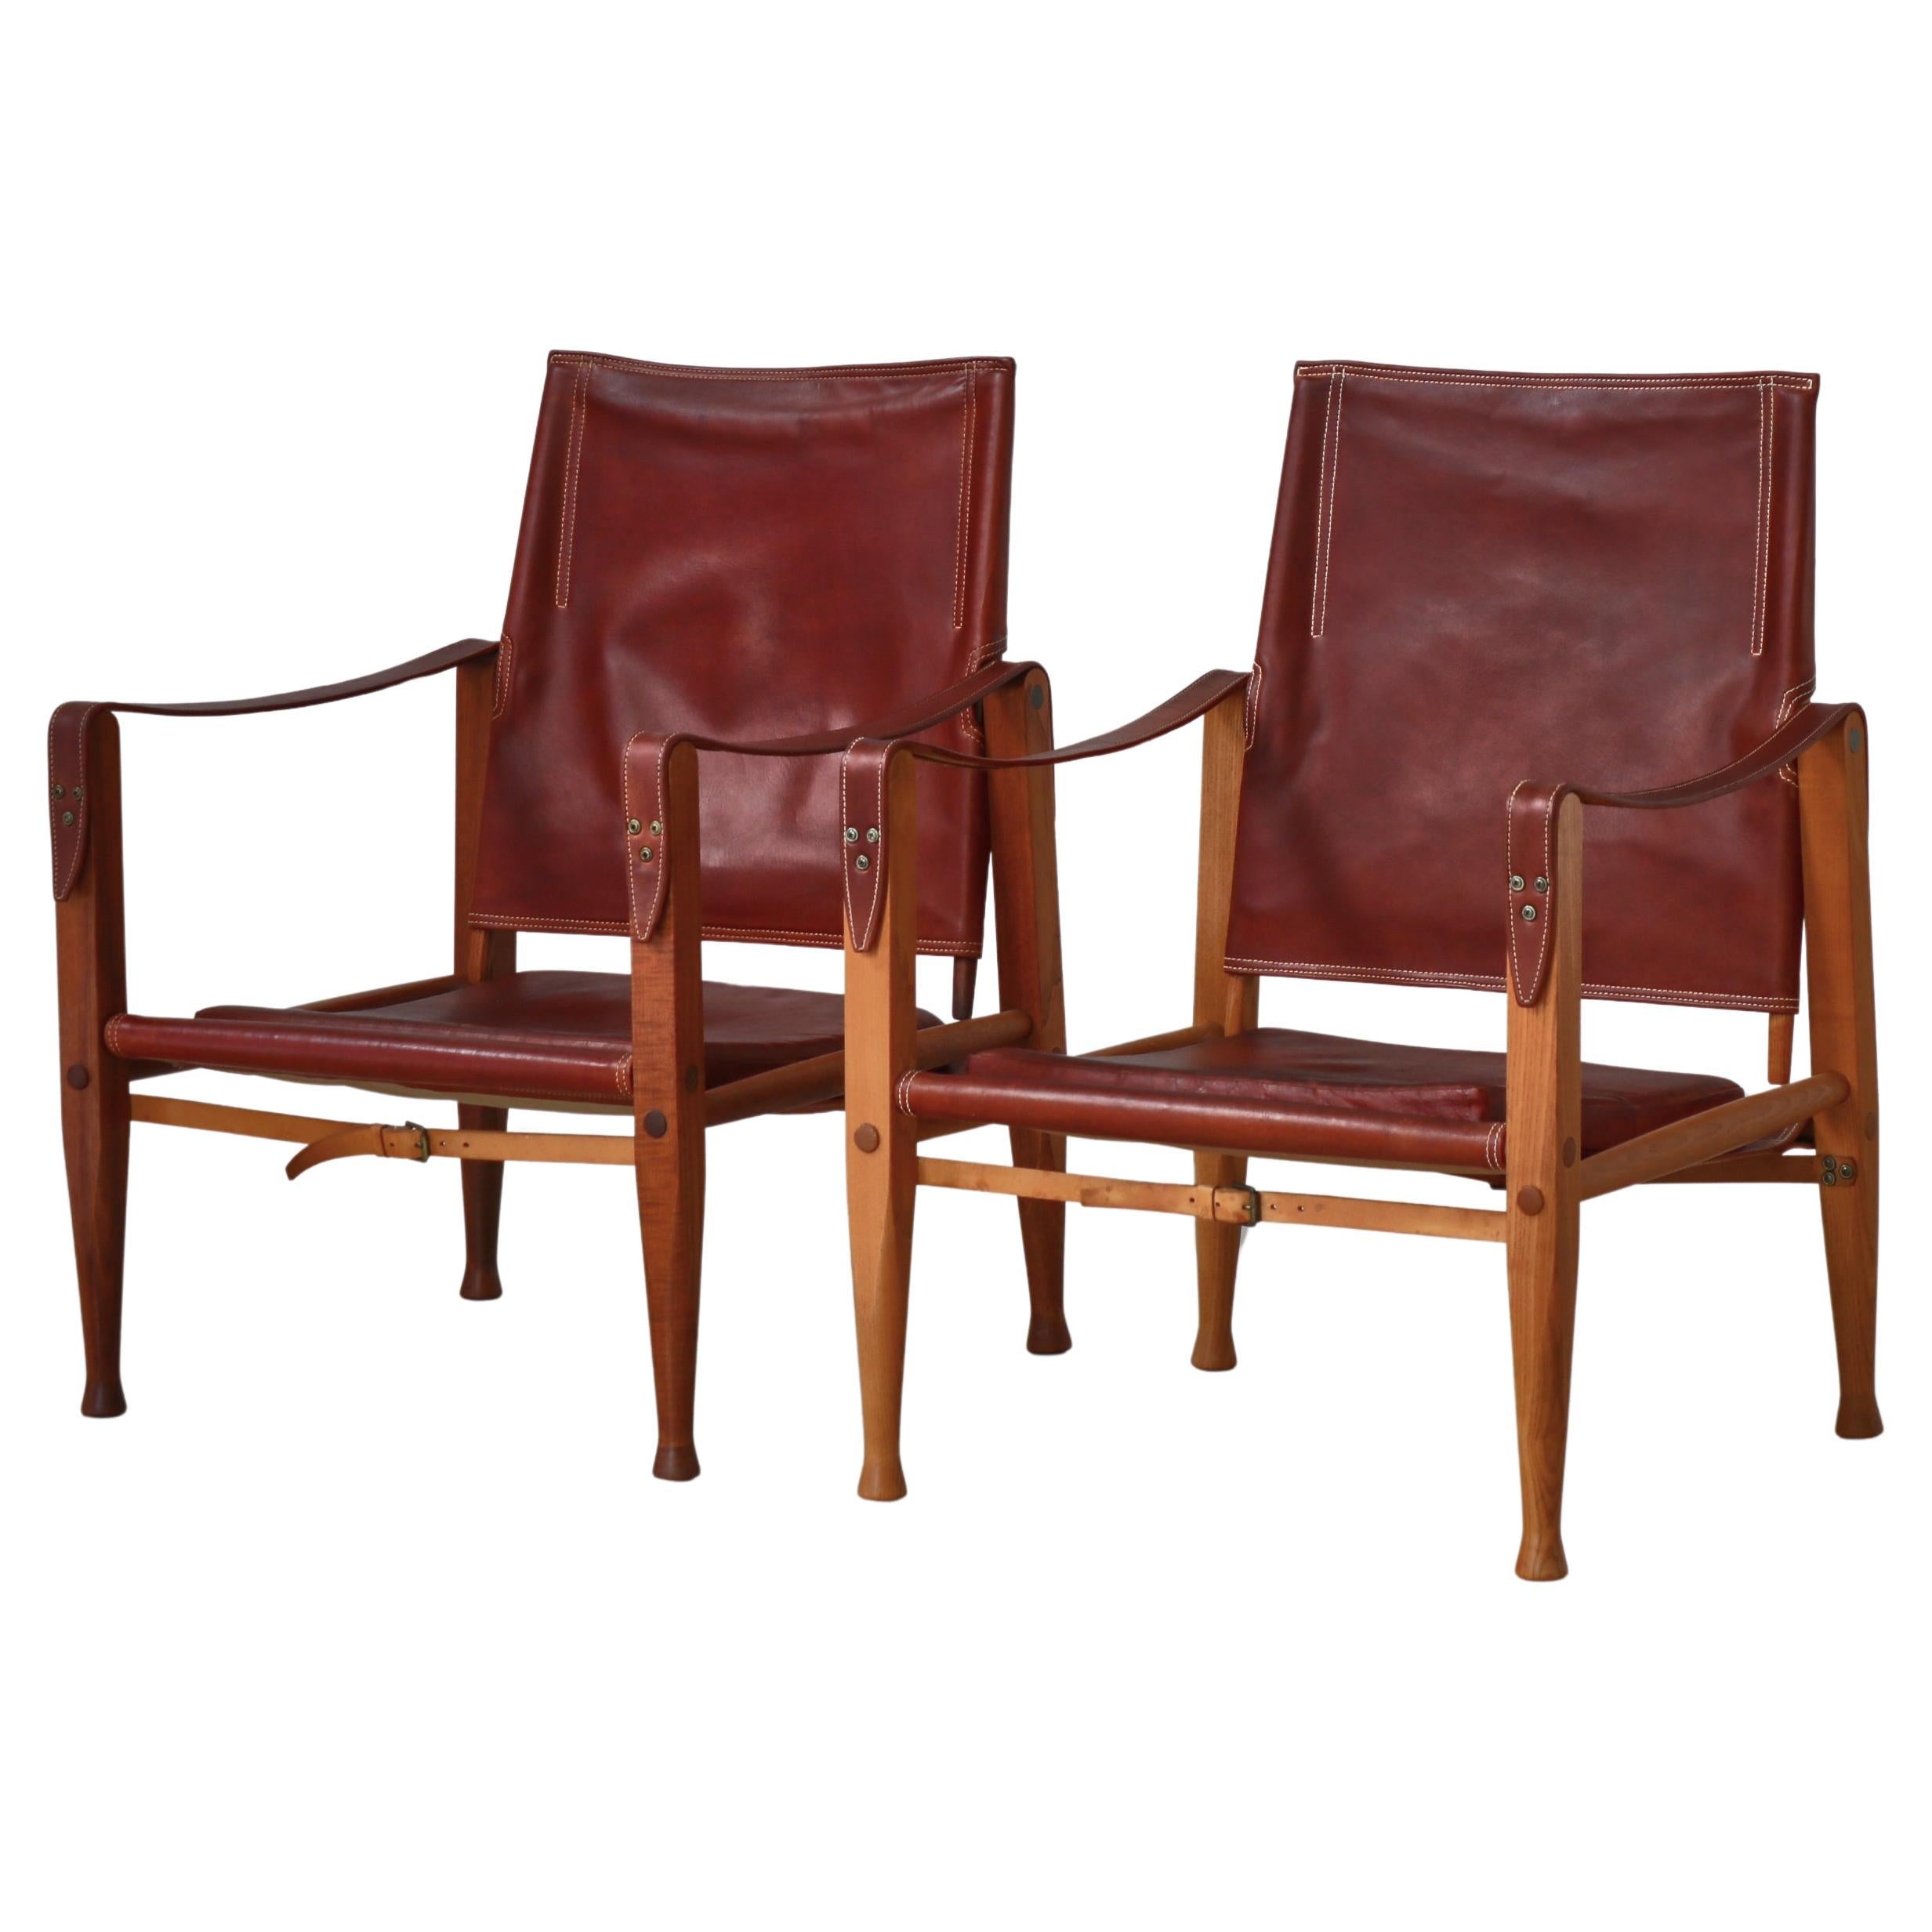 Kaare Klint "Safari" Lounge Chairs in Red Leather and Ash, Rud Rasmussen, 1950s